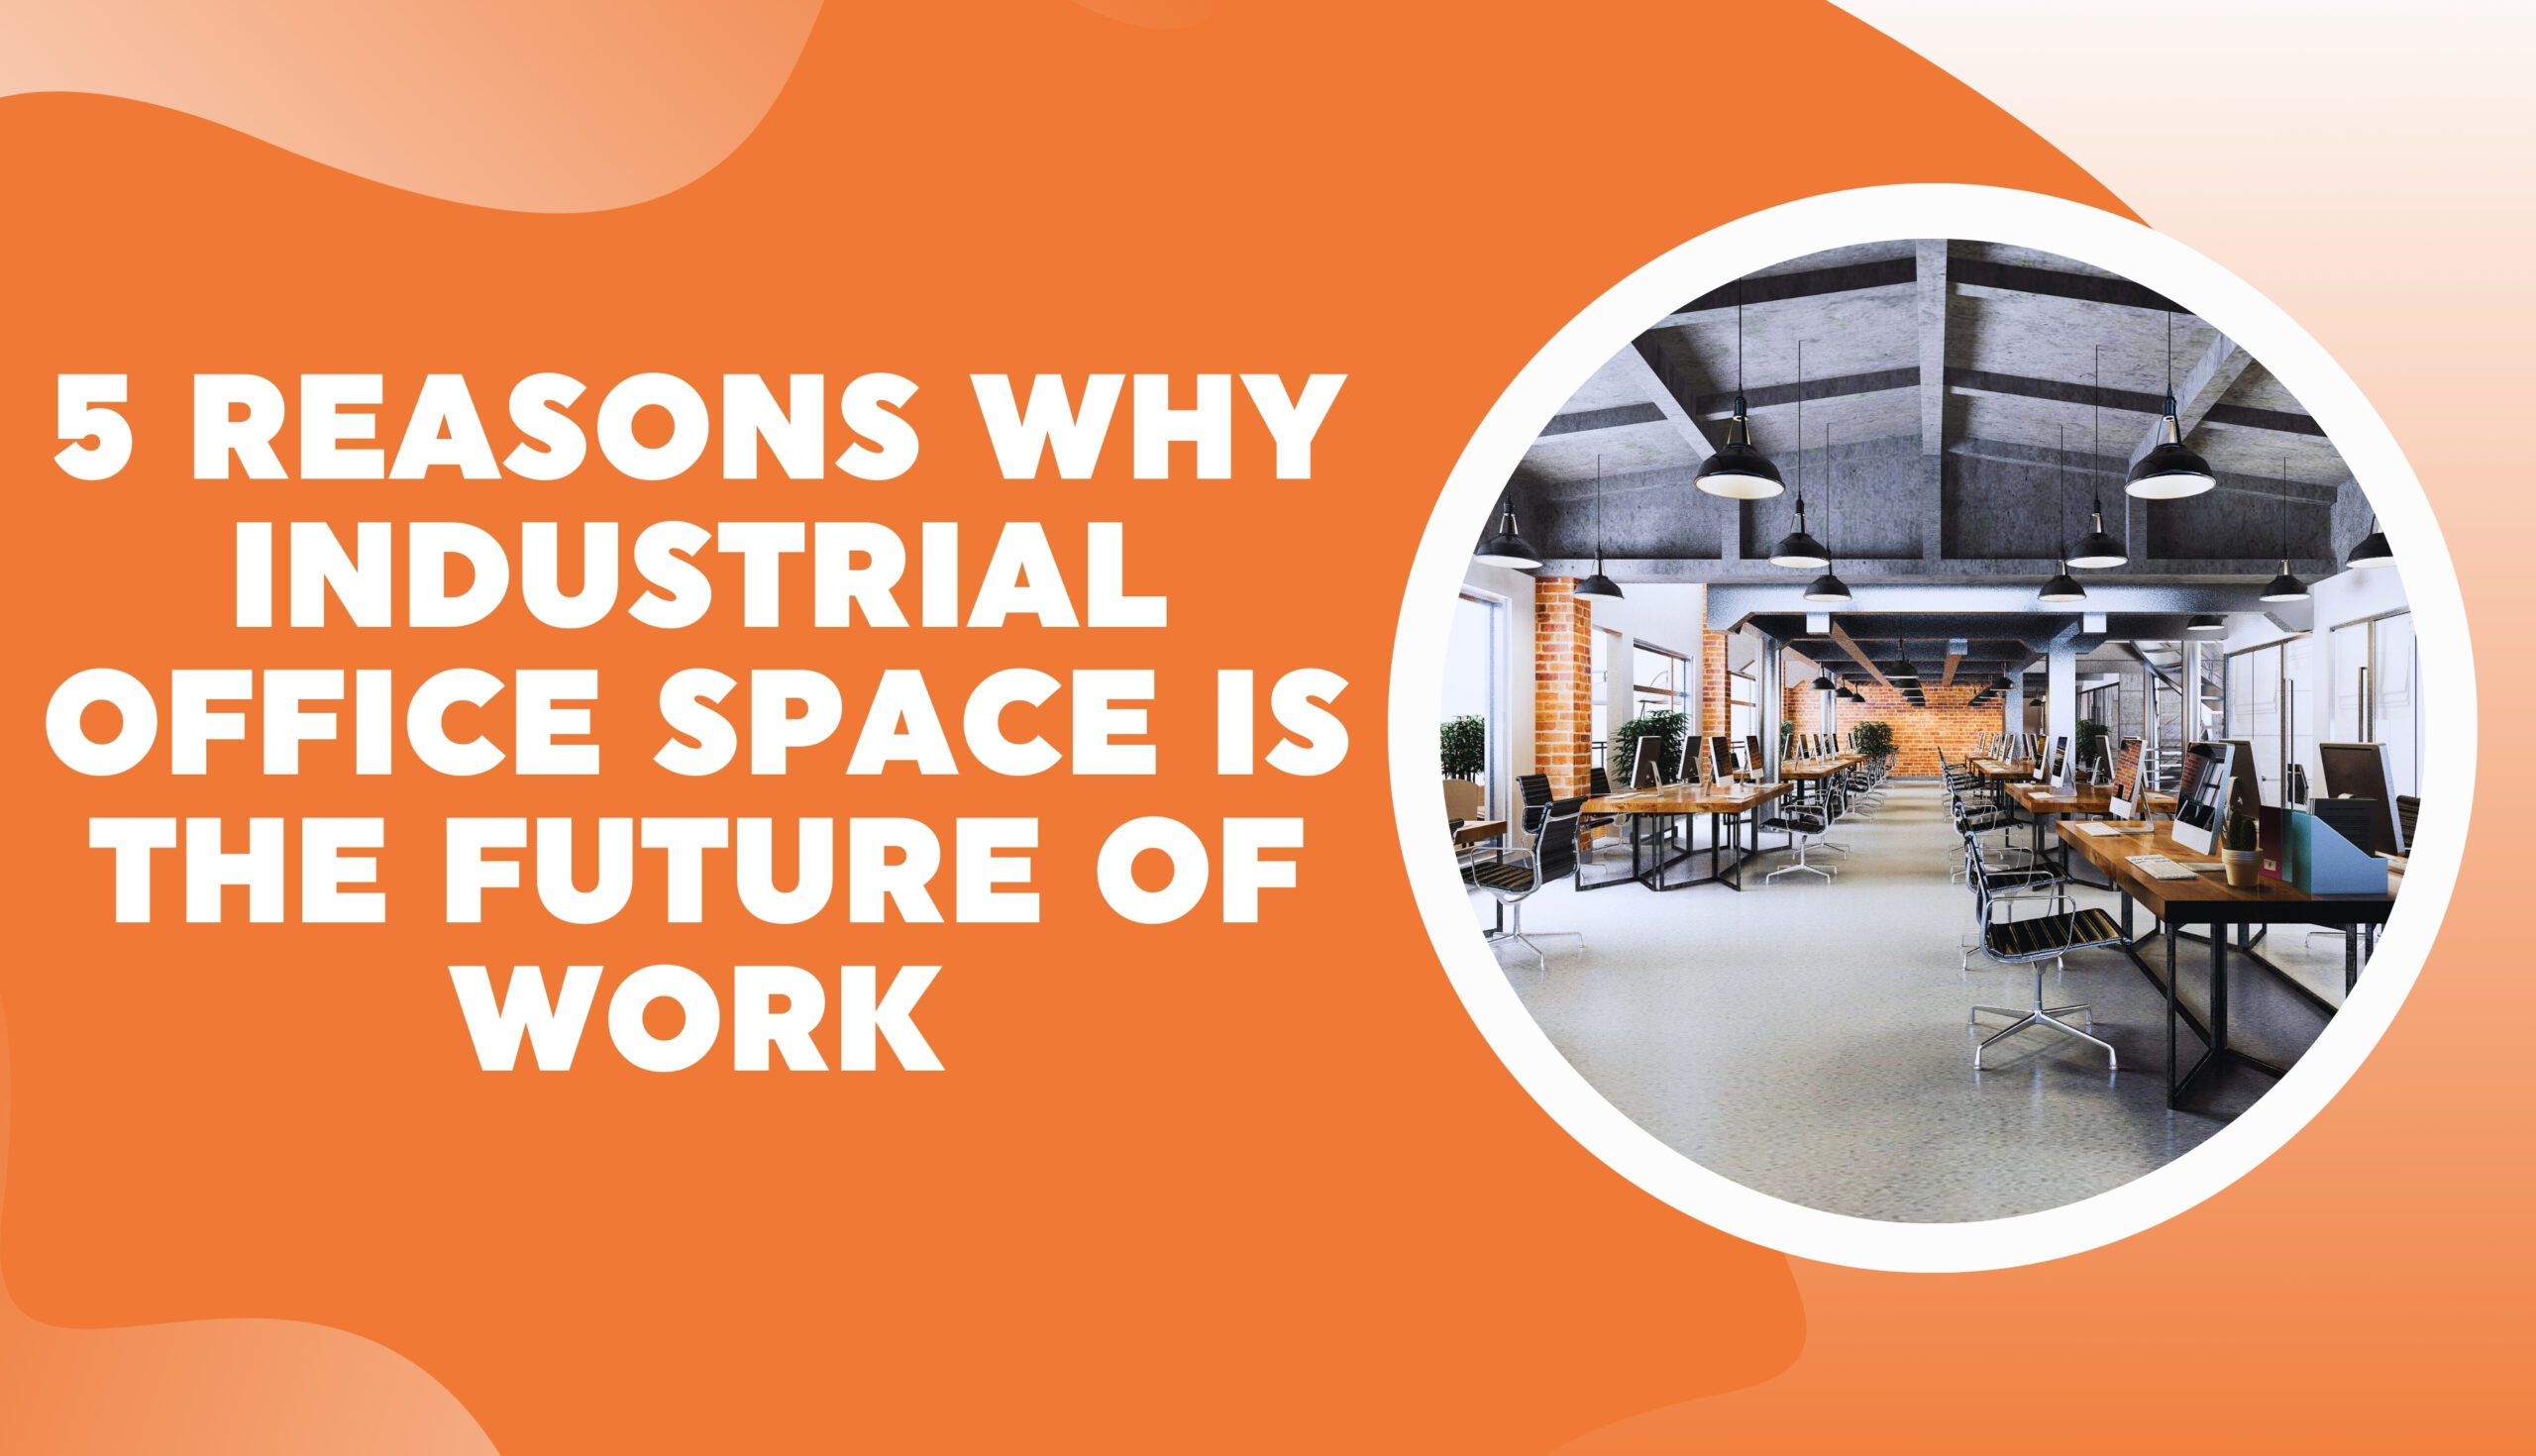 5 Reasons Why Industrial Office Space is the Future of Work